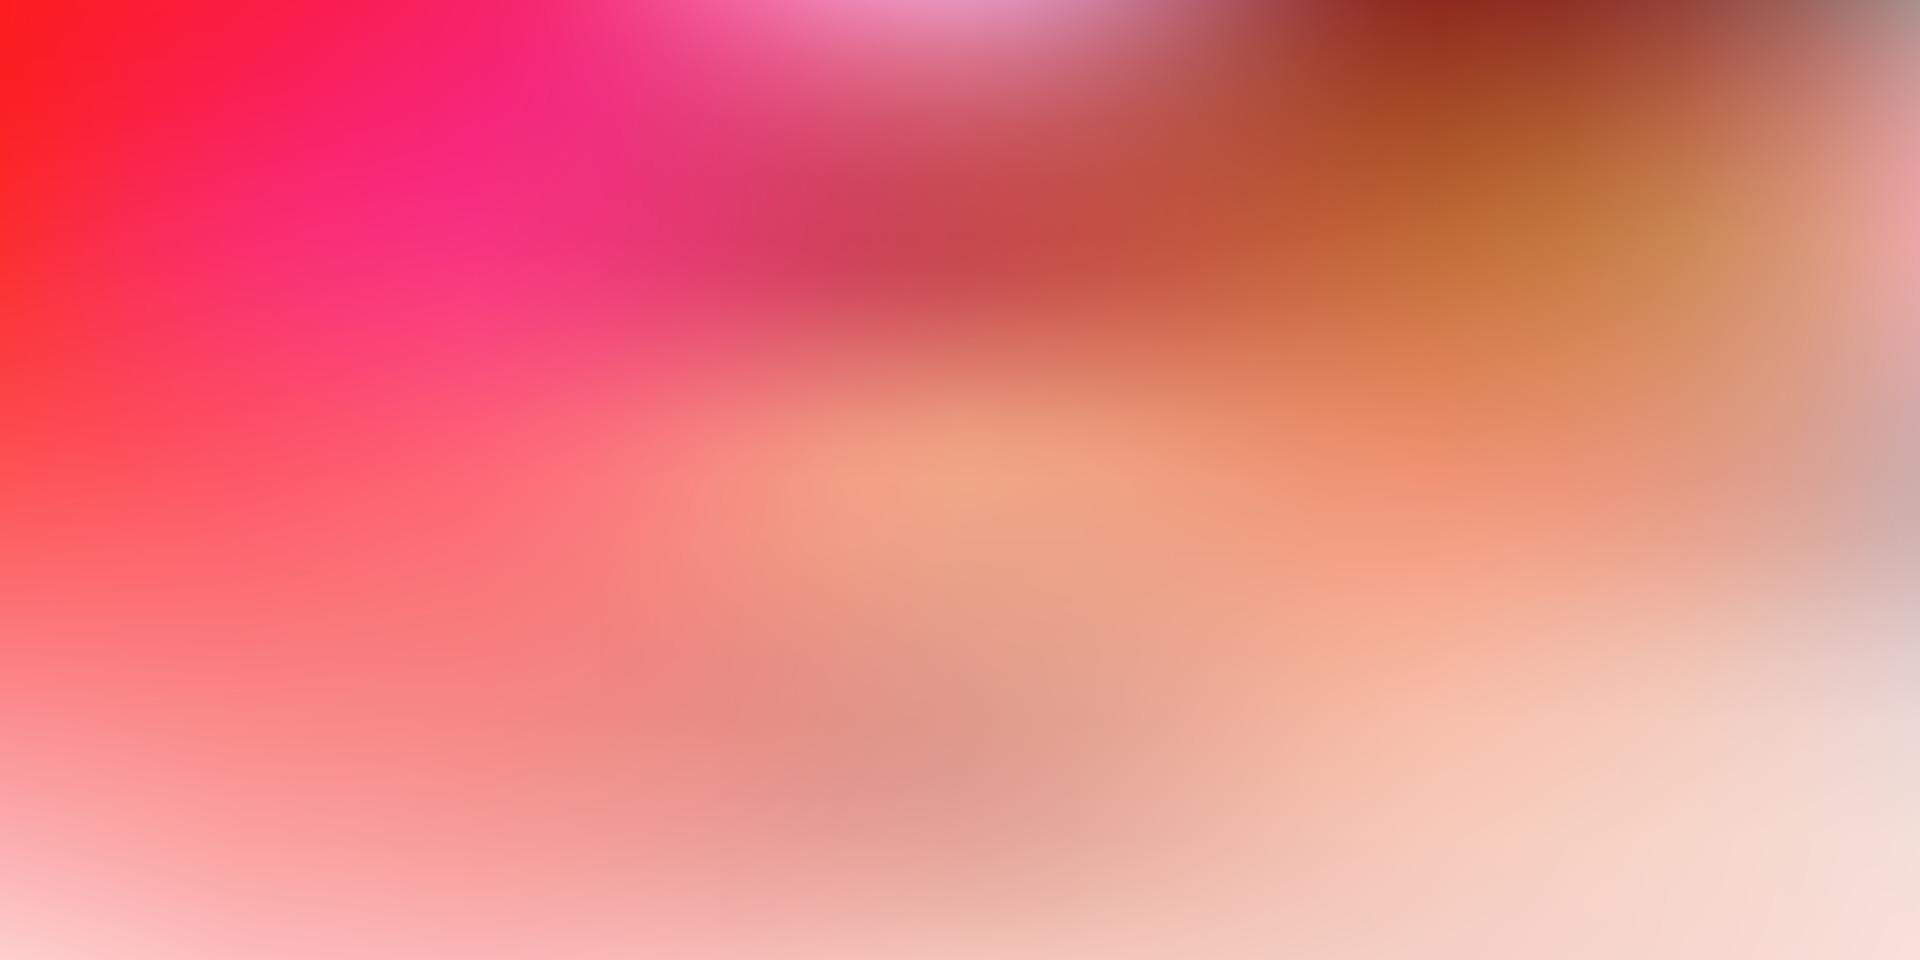 Light red, yellow vector abstract blur template.